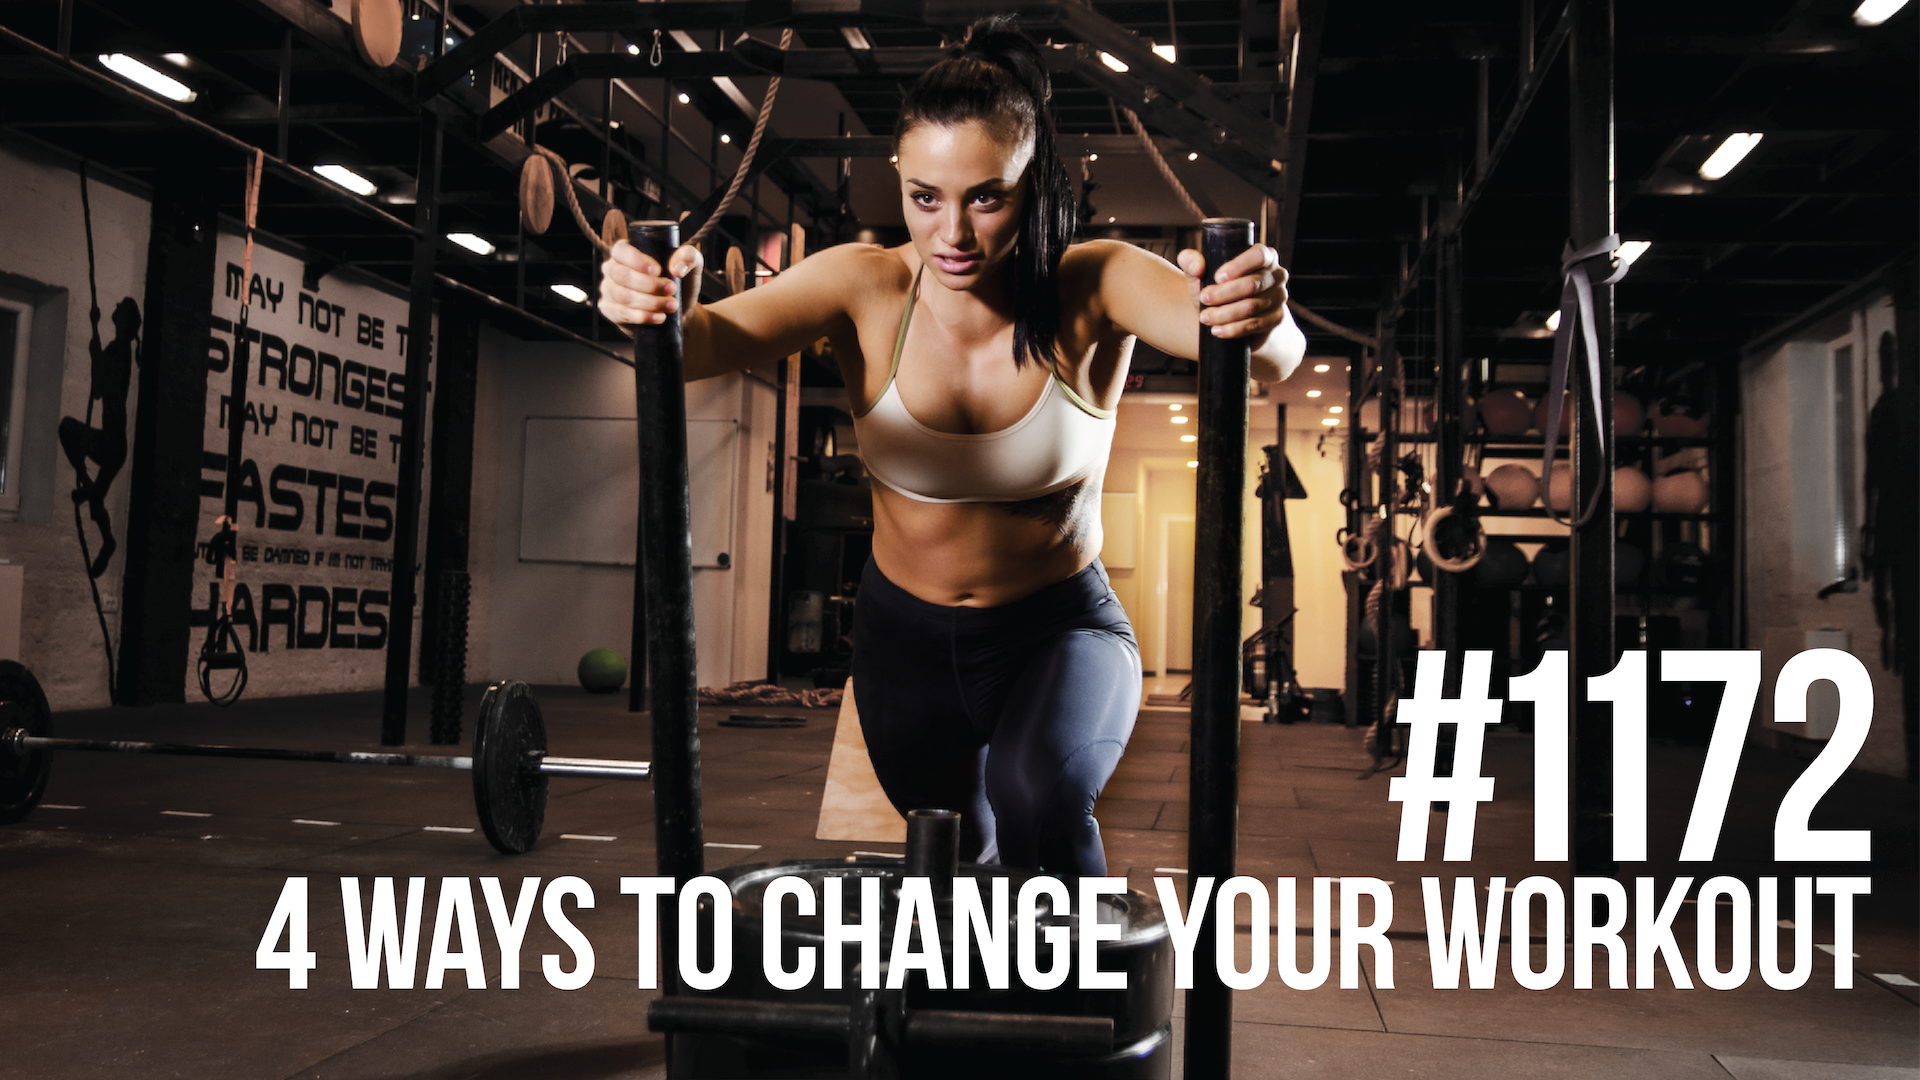 1172: Four Ways to Change Your Workout for Maximum Results